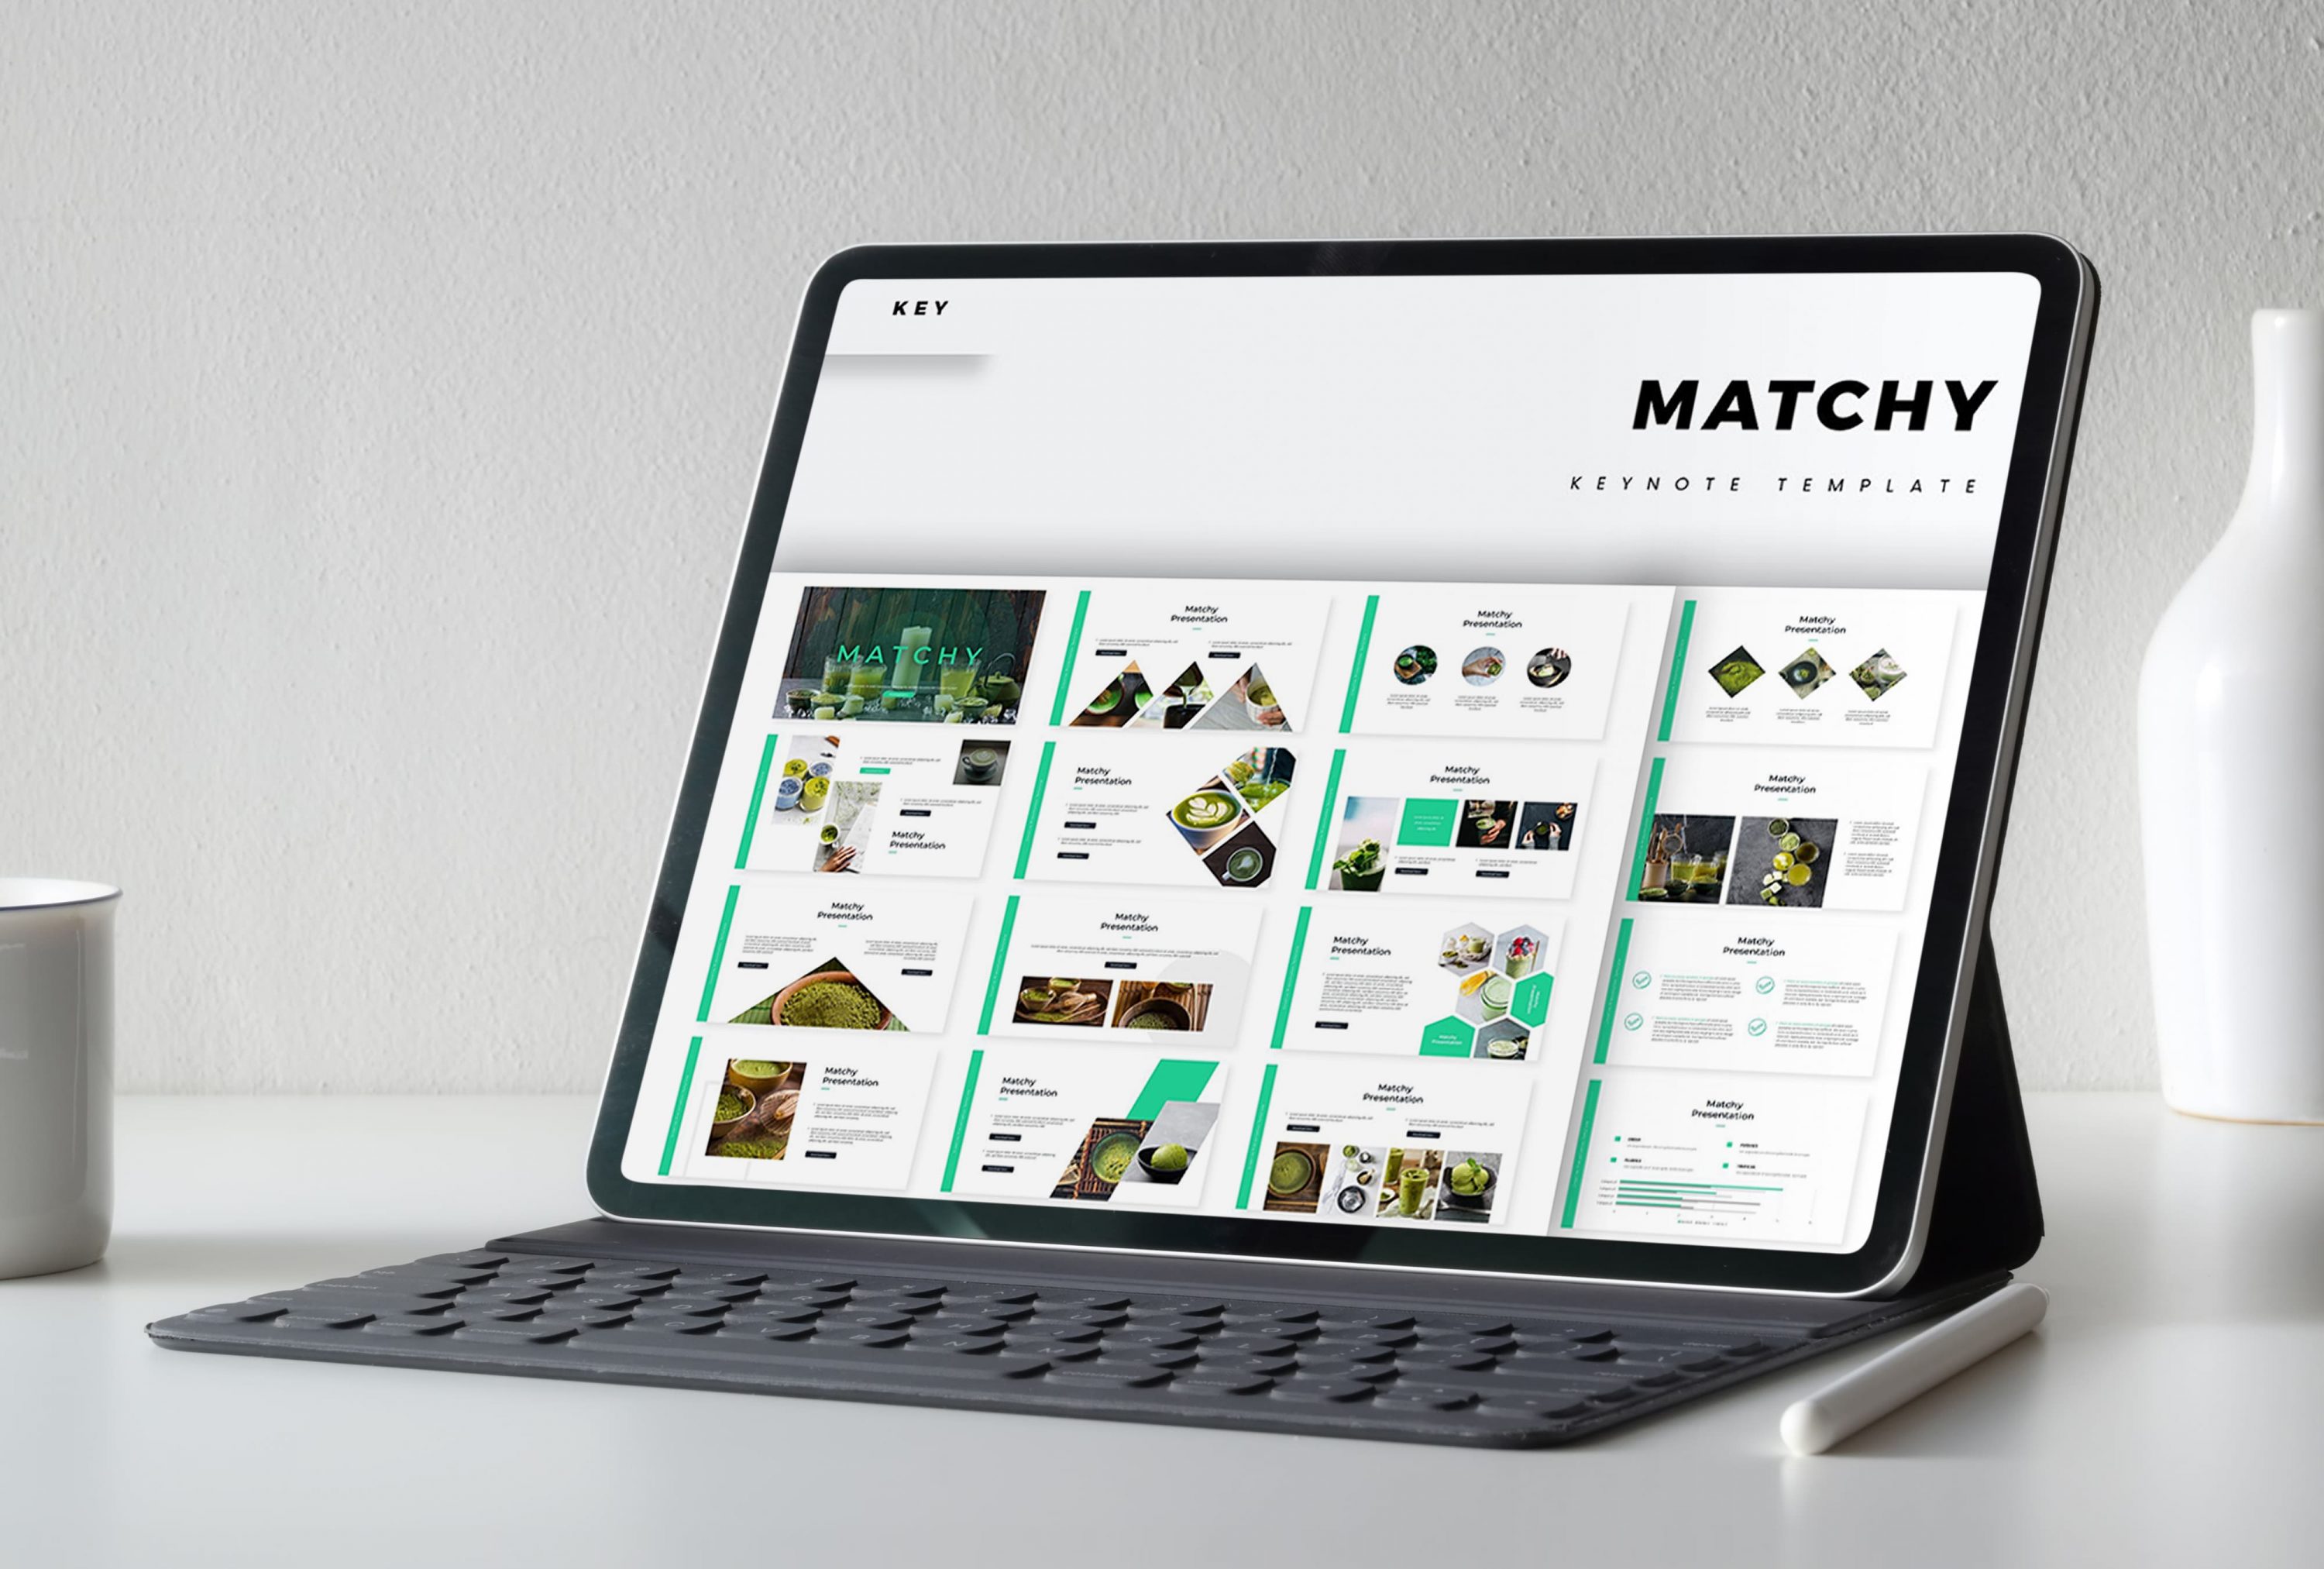 Laptop option of the Matchy - Keynote Template.